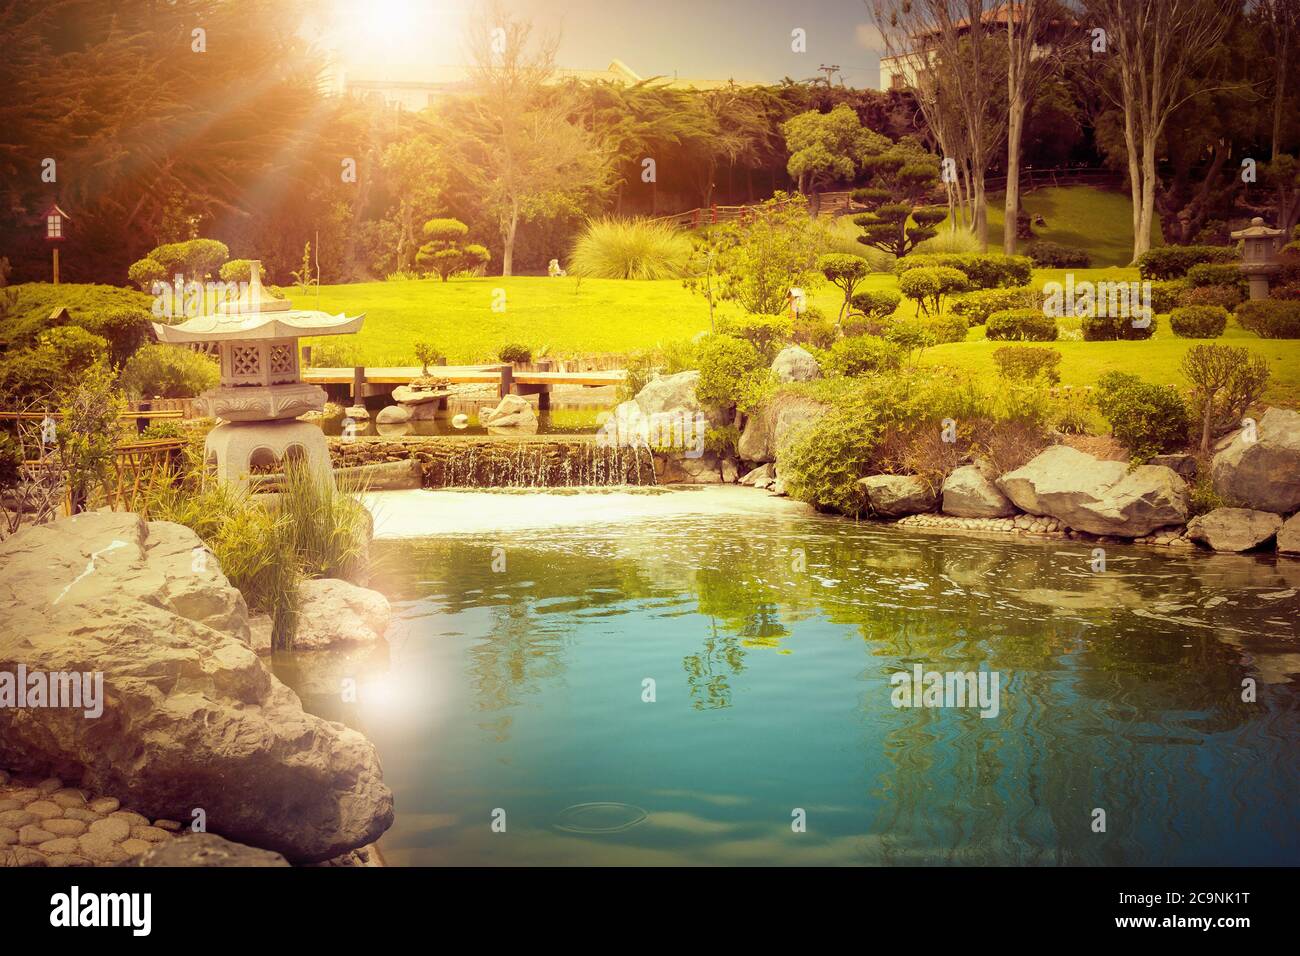 Japanese garden with beautiful stone lantern and reflections in the pond at sunset in La Serena, Chile Stock Photo